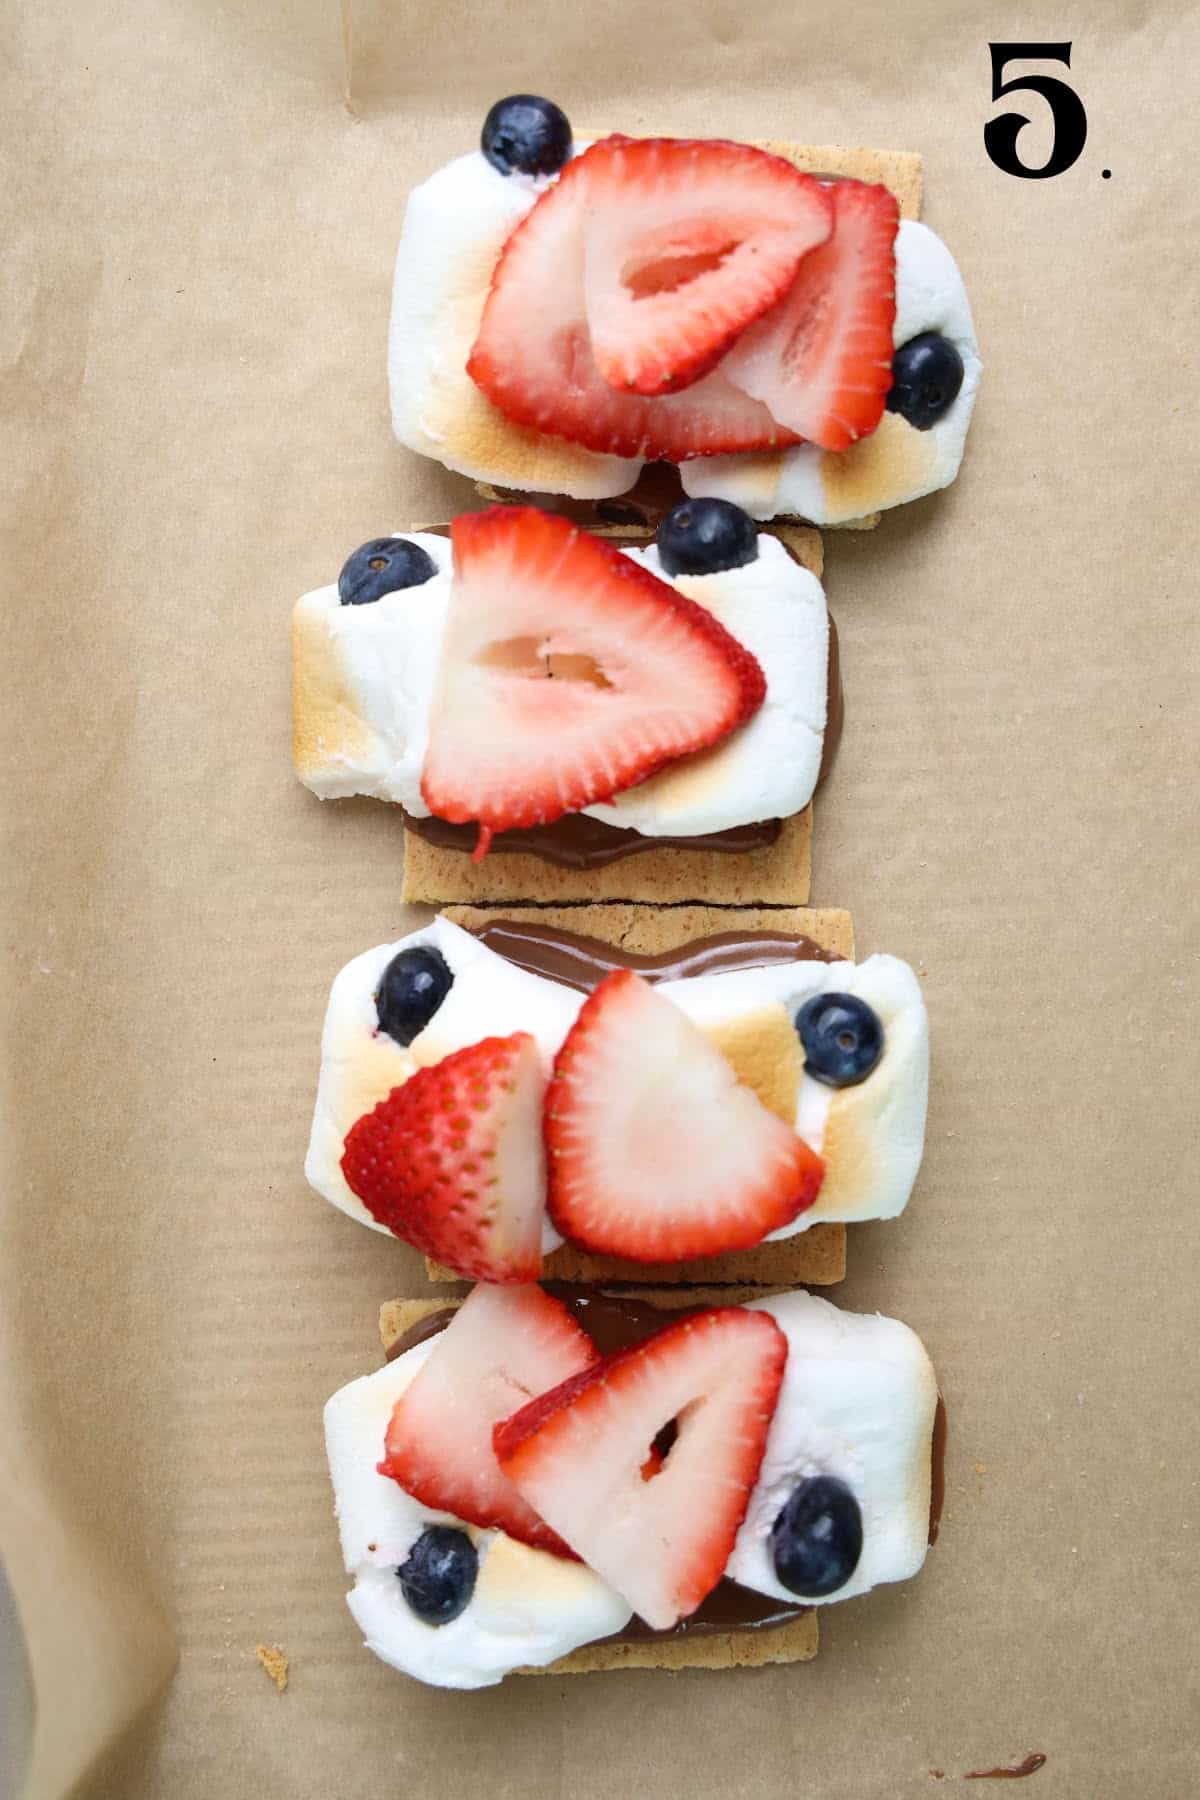 How to Make 4th of July S'mores Step 5 - strawberry slice and blueberries on melted marshmallows.